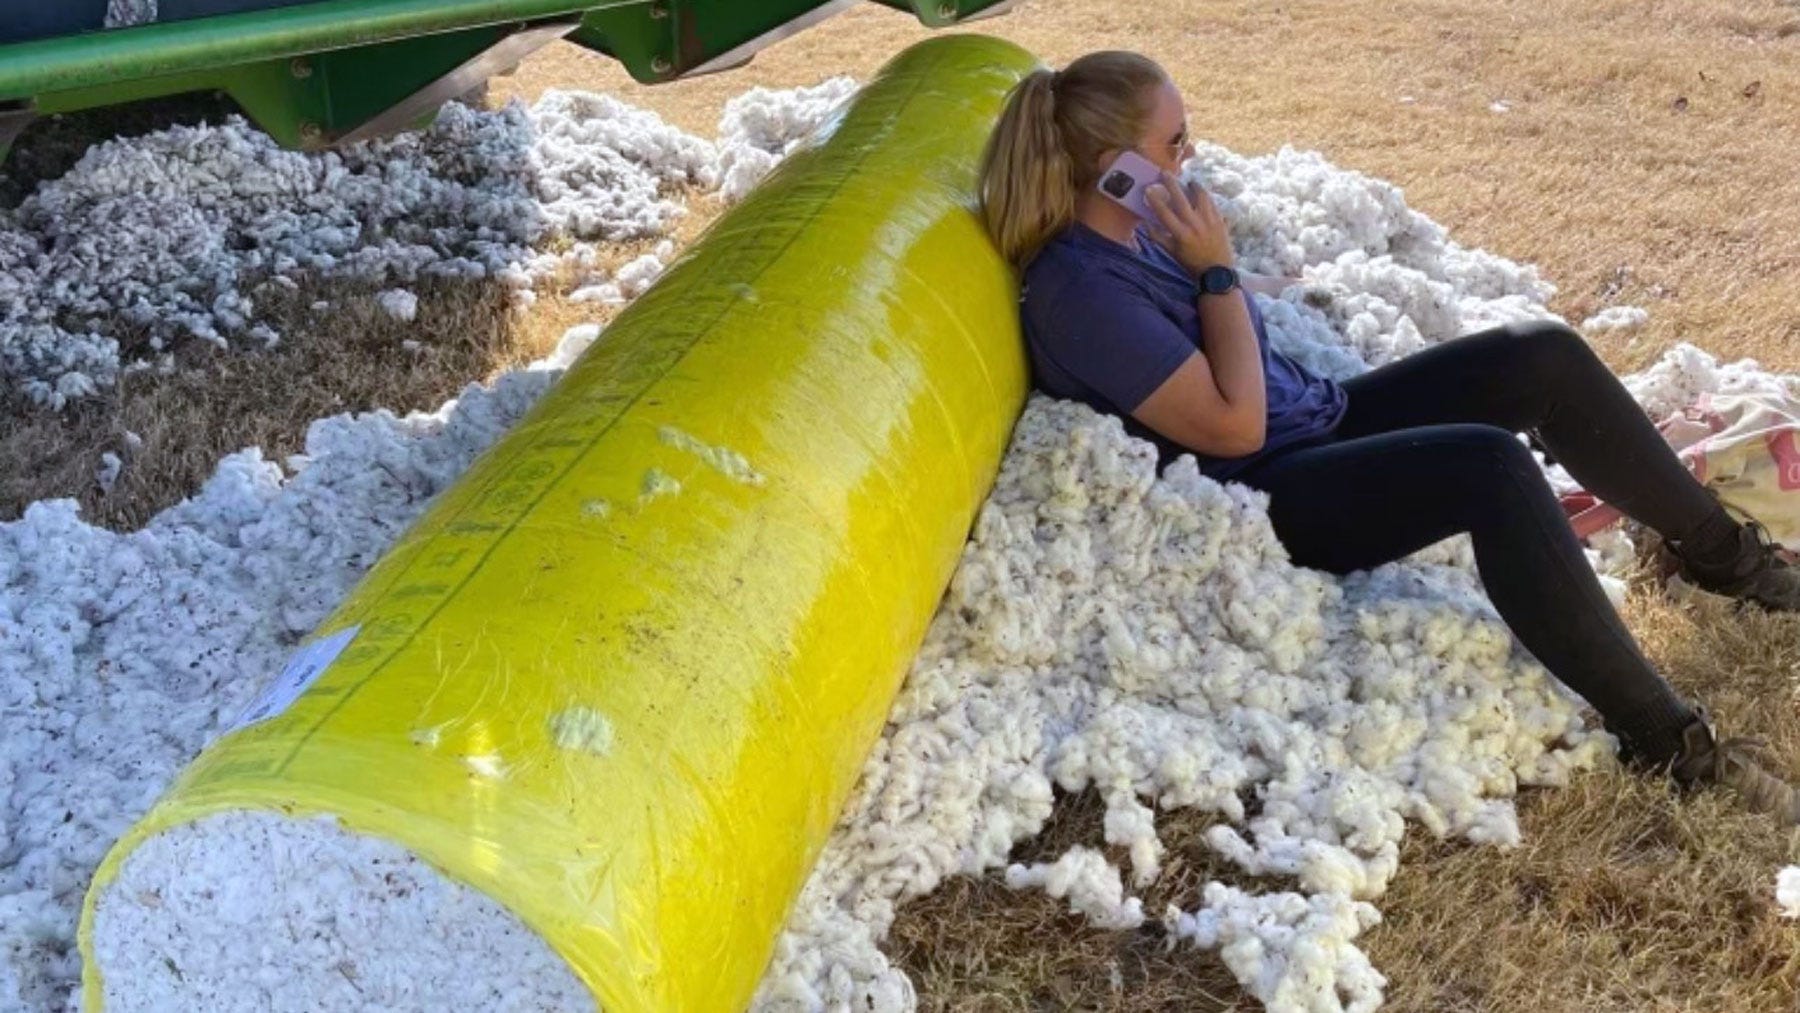 Woman sitting in pile of picked cotton beneath a parked cotton picker, leaned against a small cotton bale while taking a phone call.